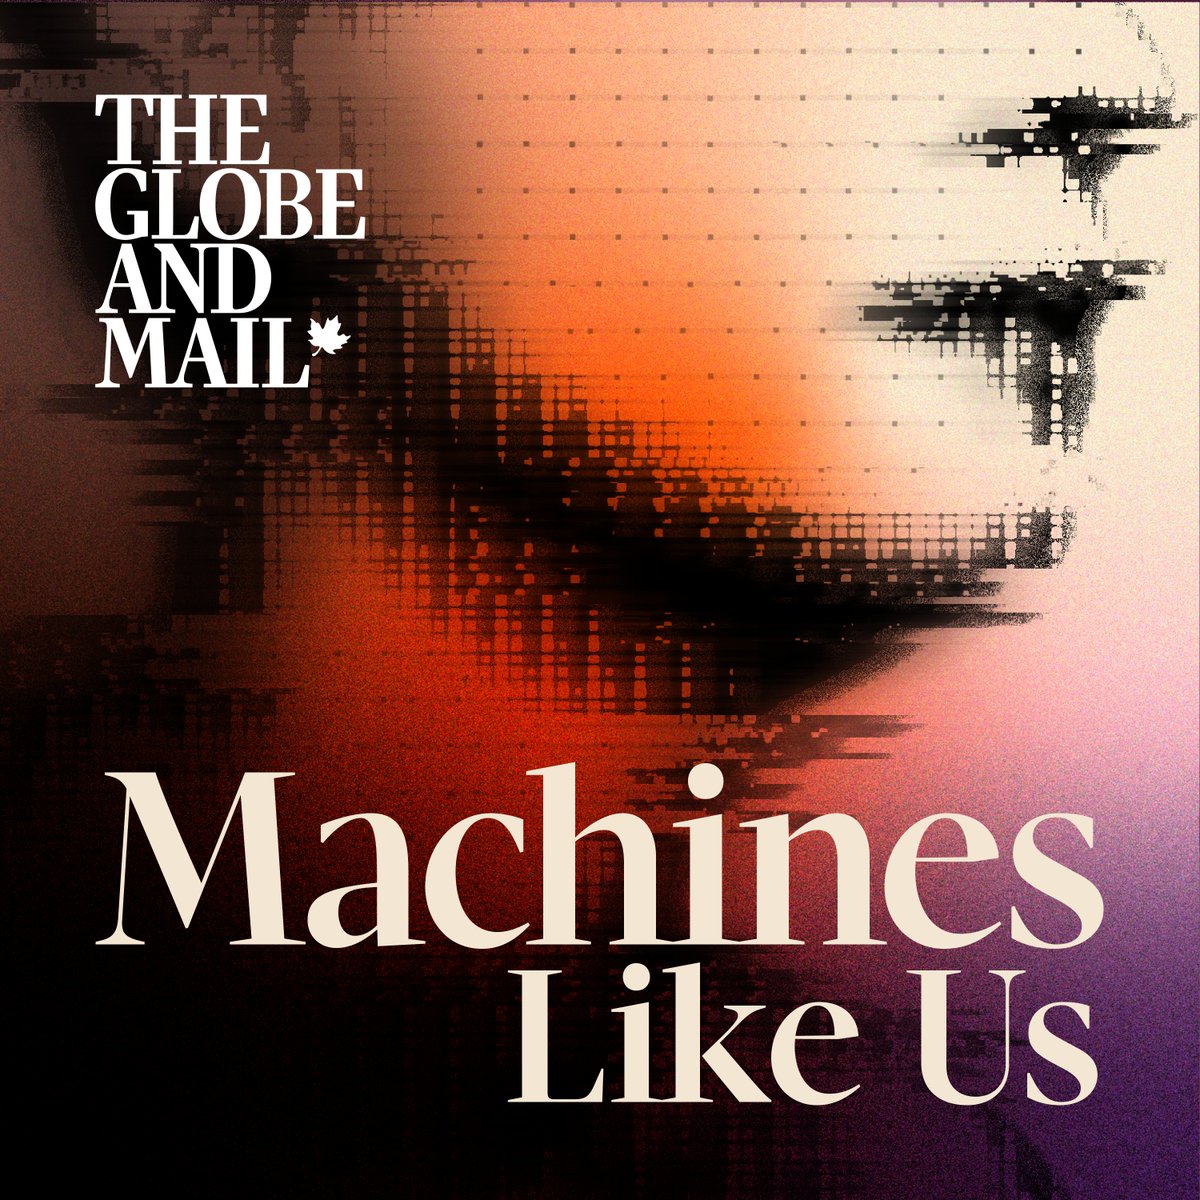 This week, The Globe launched Machines Like Us, a technology podcast, about people. With a bi-weekly show, host @taylor_owen speaks to AI’s sharpest builders, thinkers, and critics about how AI can help, how it can hurt, and how we can live intelligently alongside it. Listen in